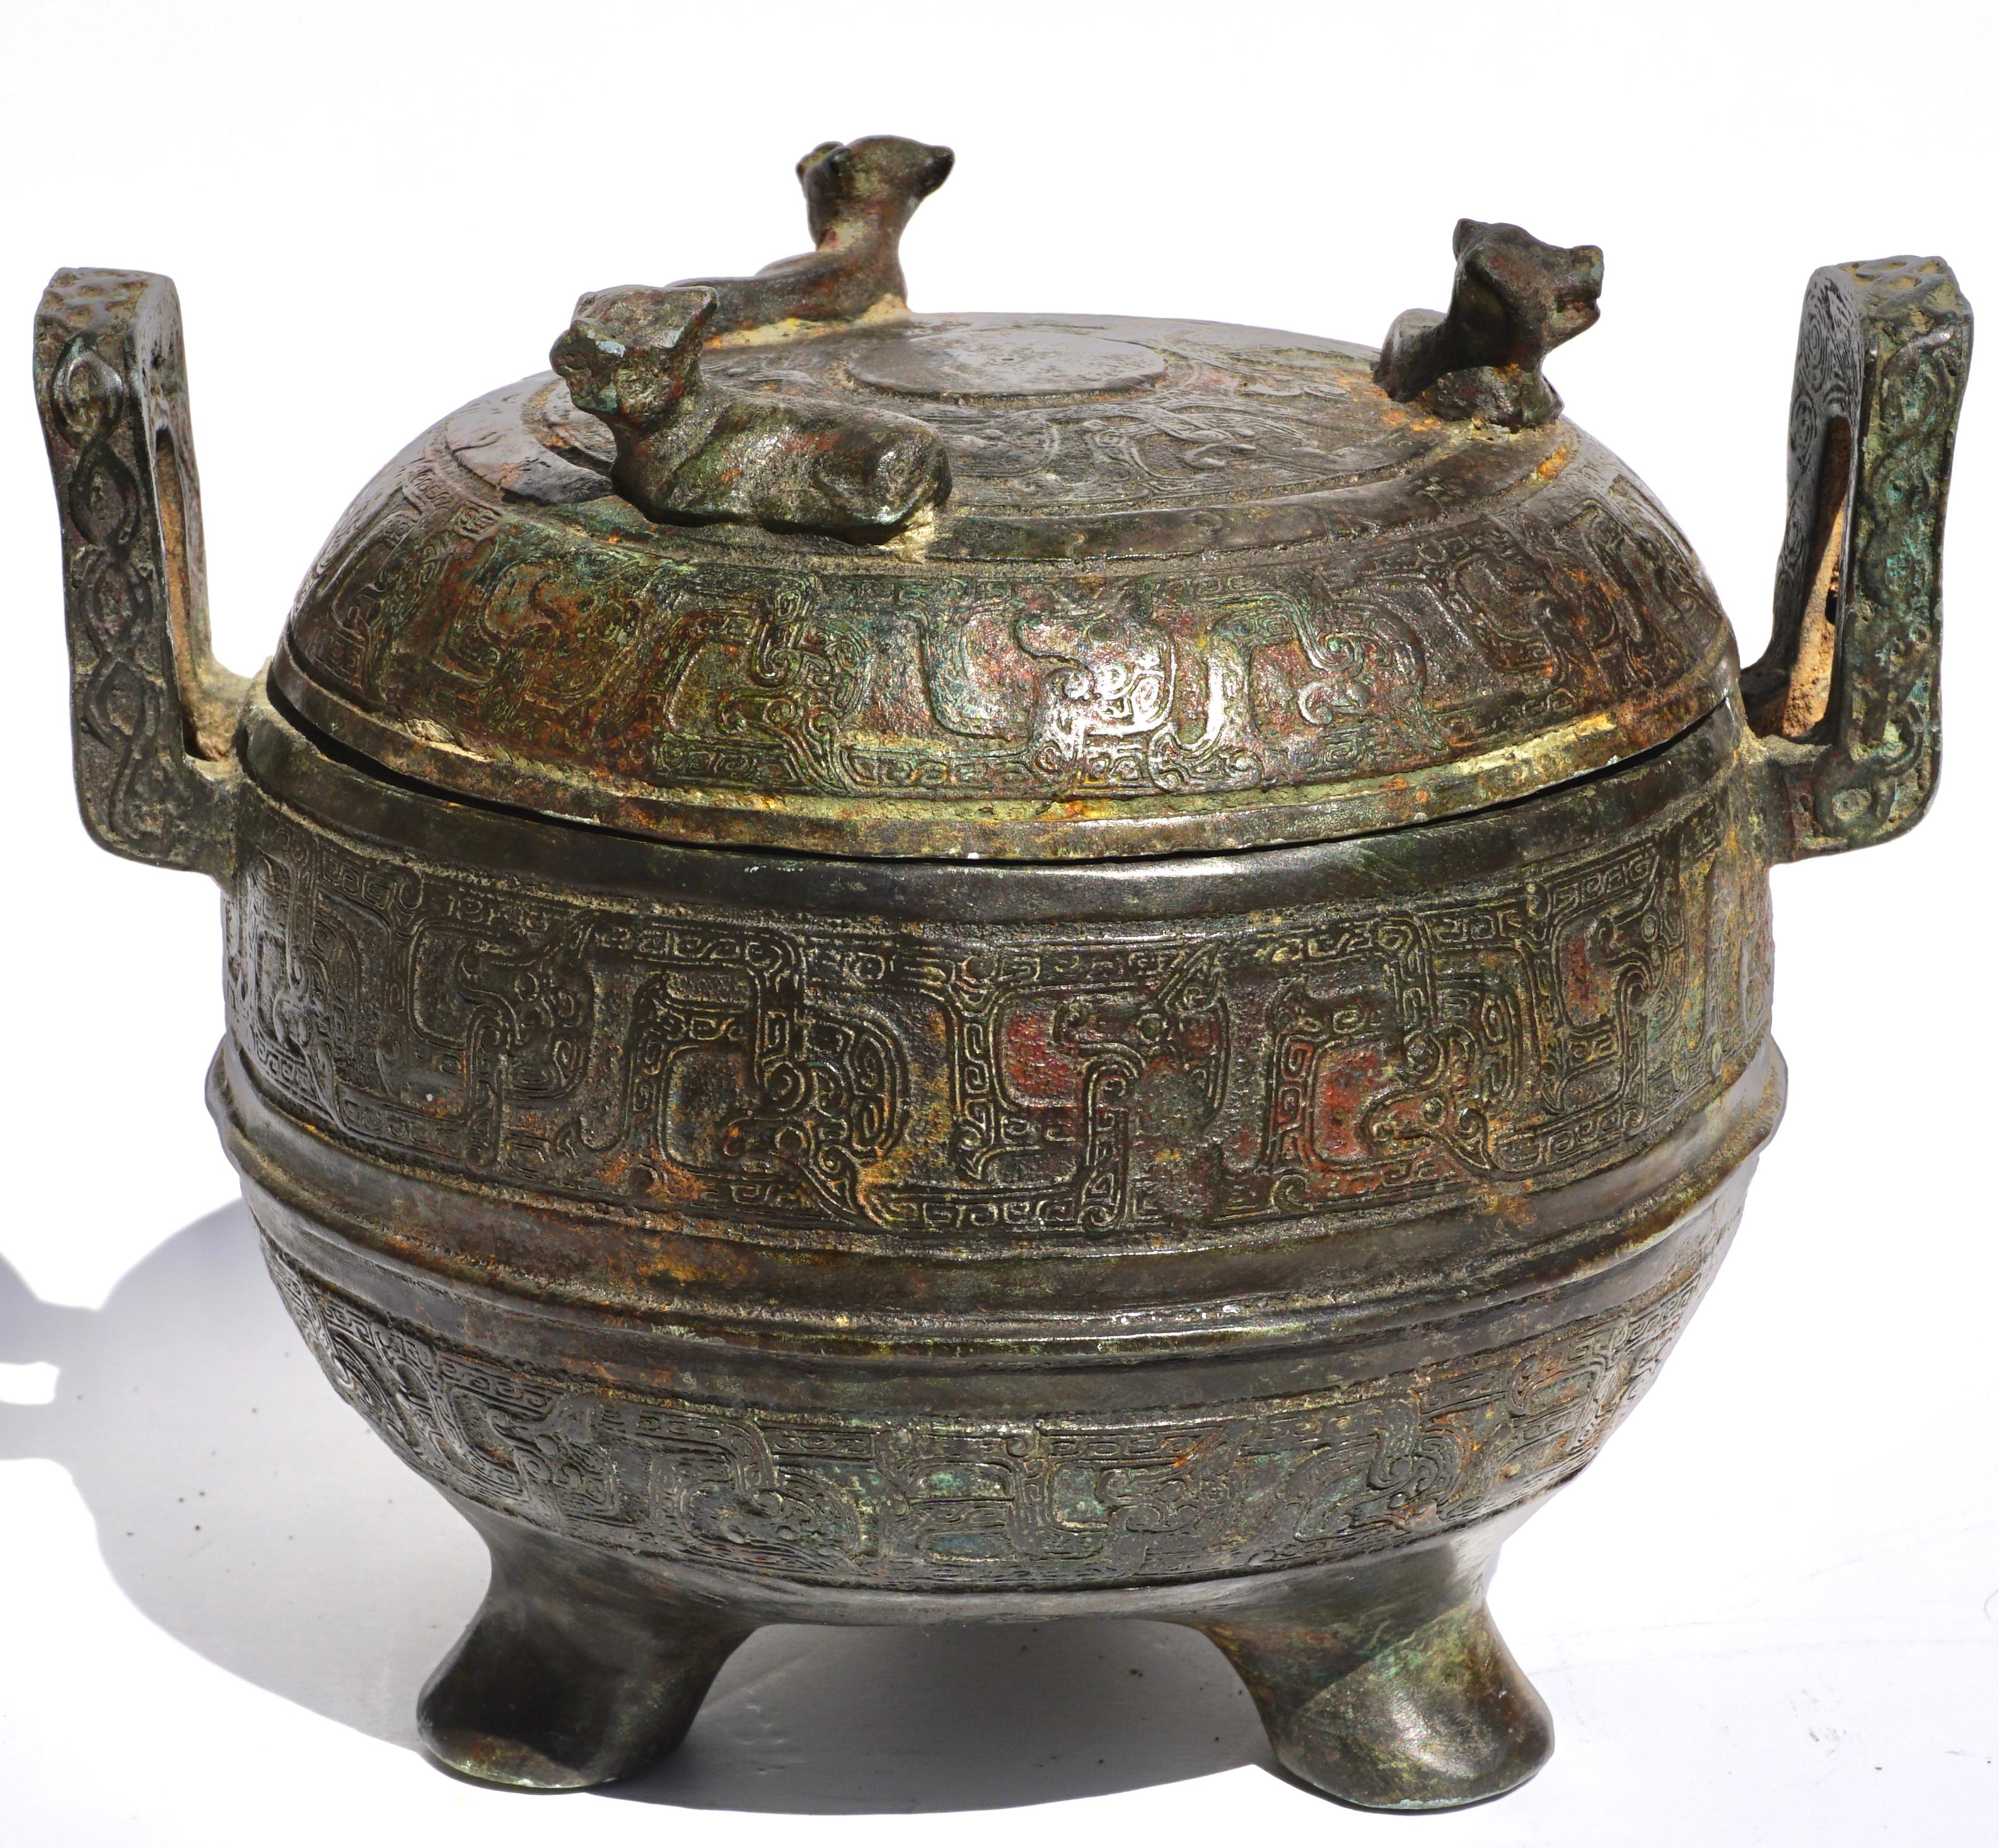 Chinese Bronze Archaistic Warring States Period Ding Pot. Circa 500 BCE

A beautifully shaped medium size bronze ritual vessel with three elegant feet and a lid with three bovine figures. The pot with two handles is decorated from top to bottom with